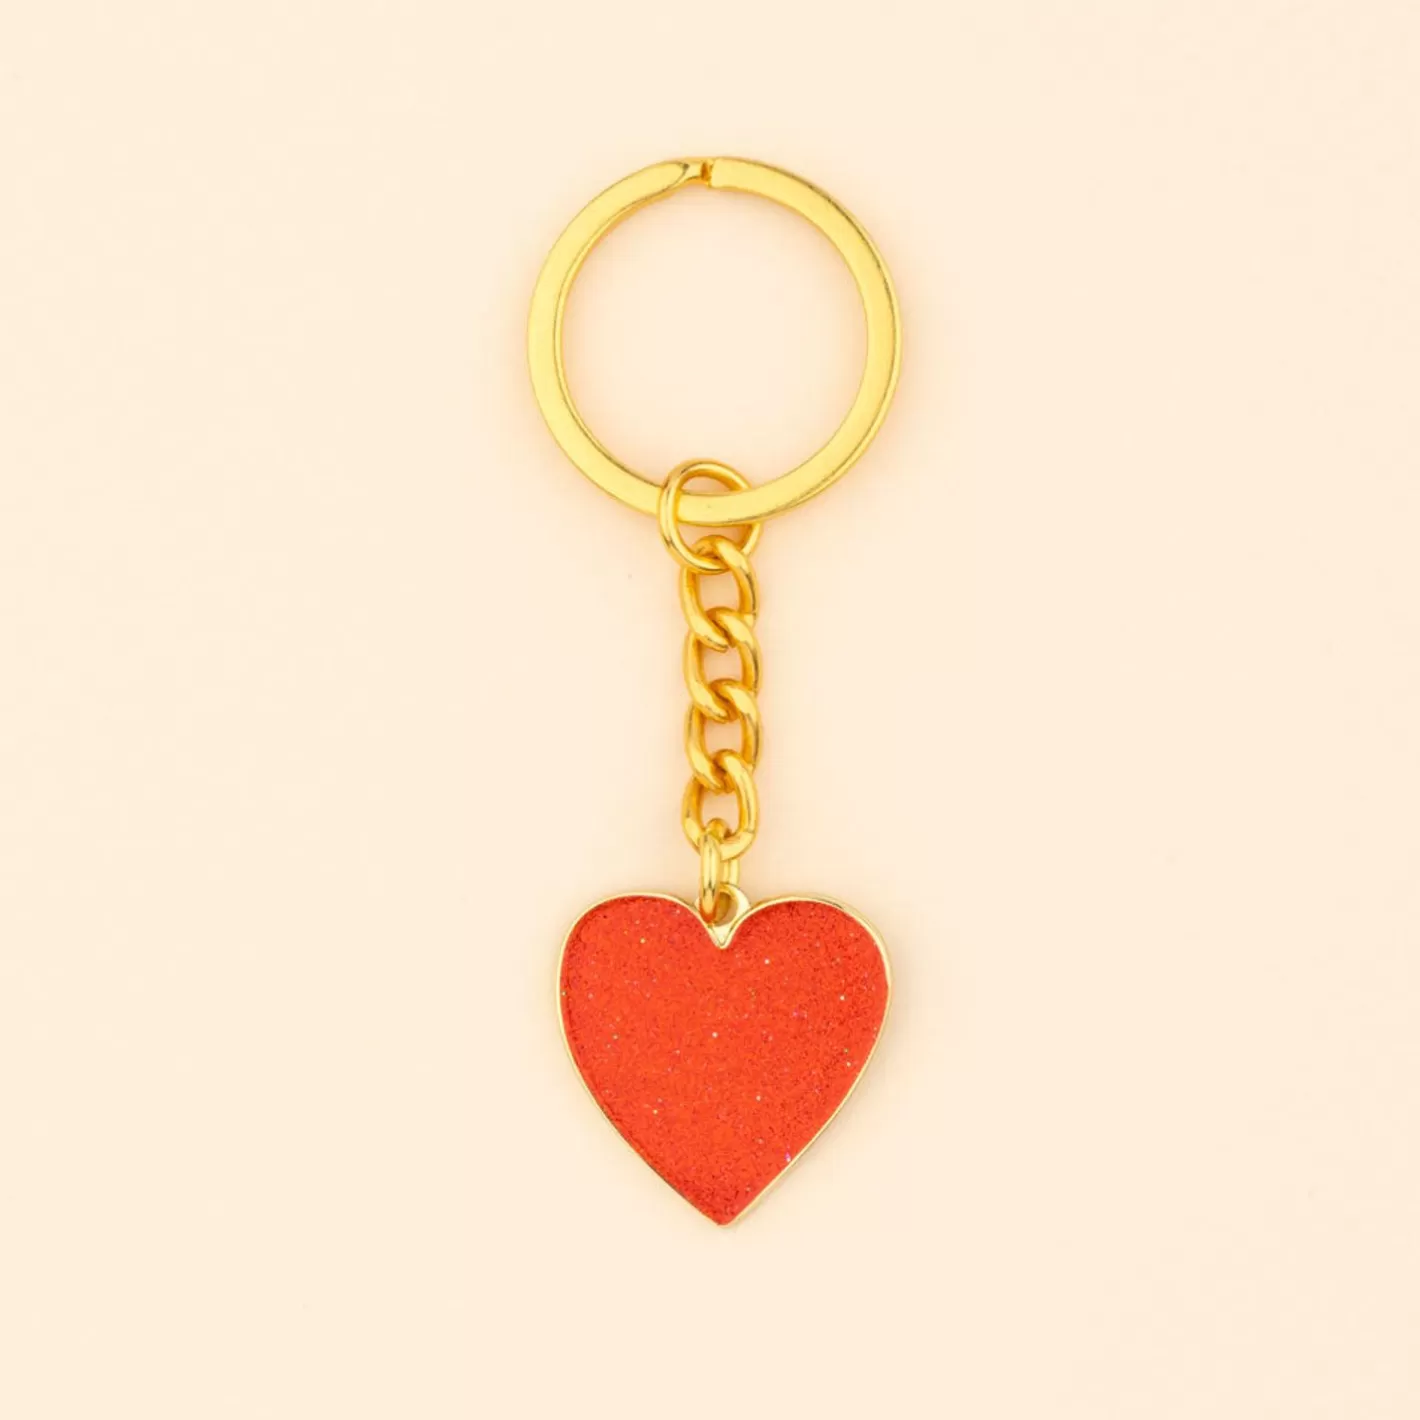 Heart Key Ring>Coucou Suzette Outlet